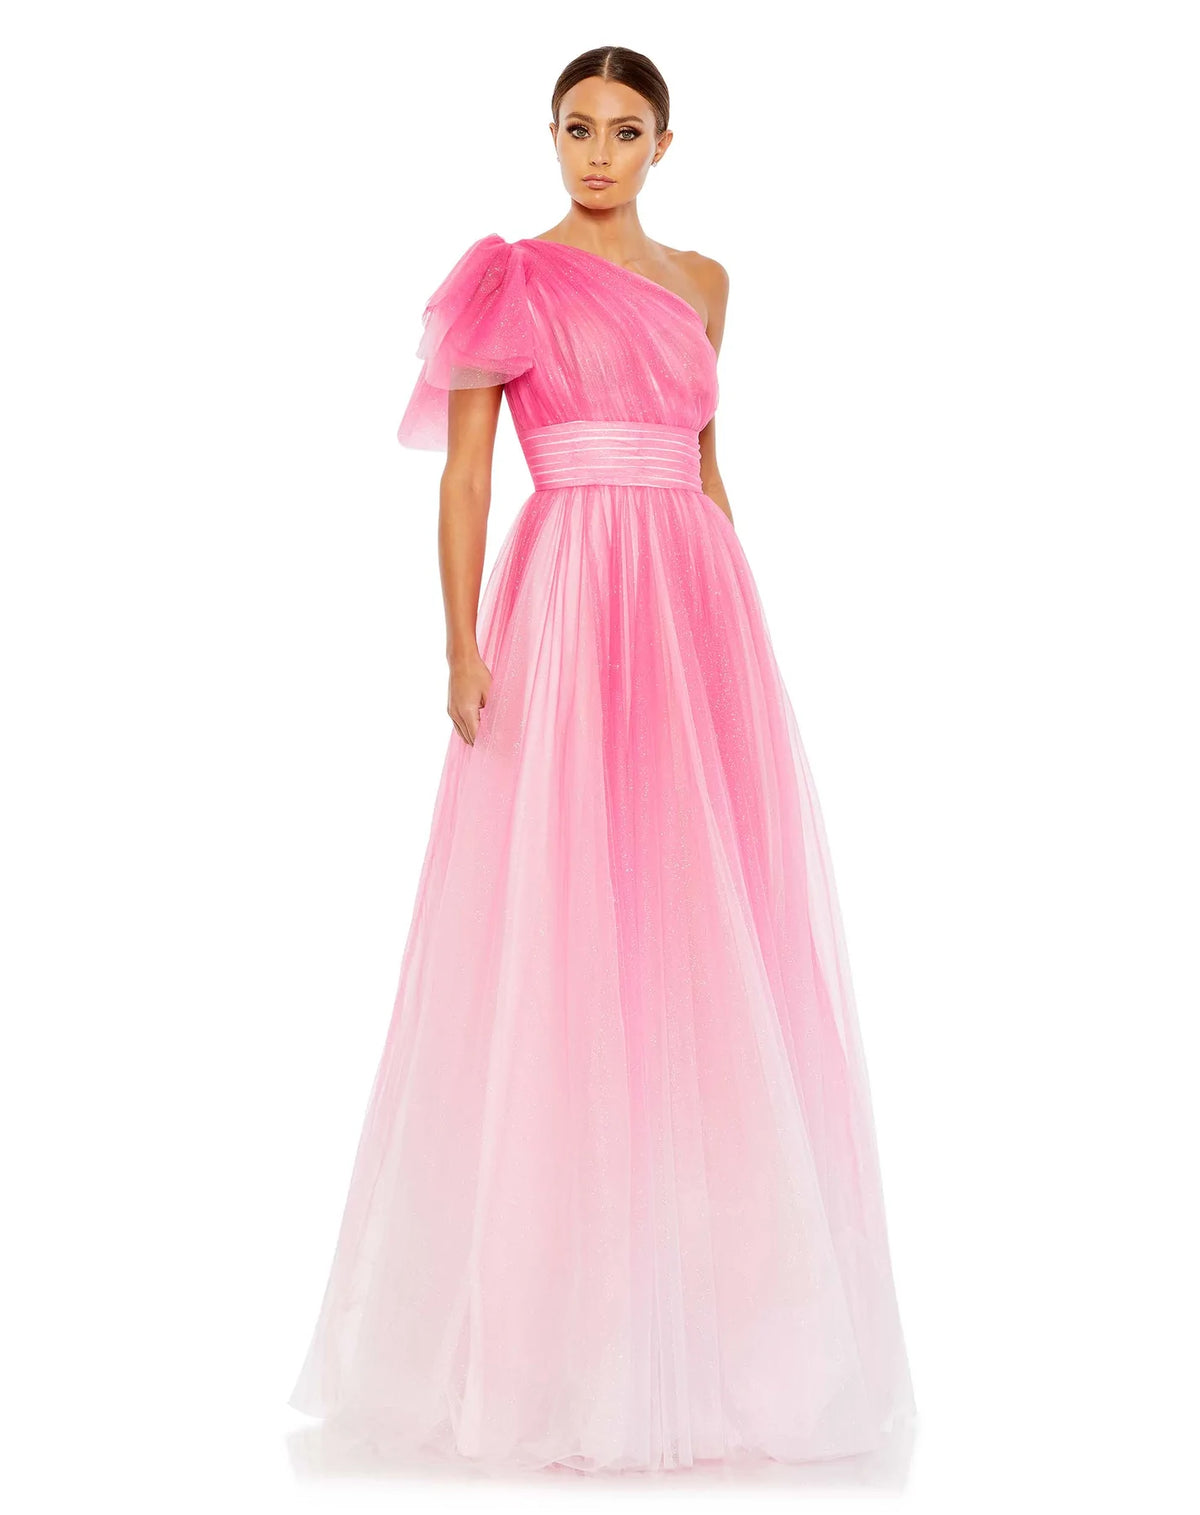 This very special, hot pink, floor length, princess A line ball gown will make you feel like. true Hollywood movie-star. Made with light-catching glitter-flecked tulle, this effervescent ball gown is styled with a one-shoulder top with a fluttery statement sleeve, a pleated waistband, and full, feminine skirt. This elegant formal dress is picture for balls, weddings and special occasions!  front view]\